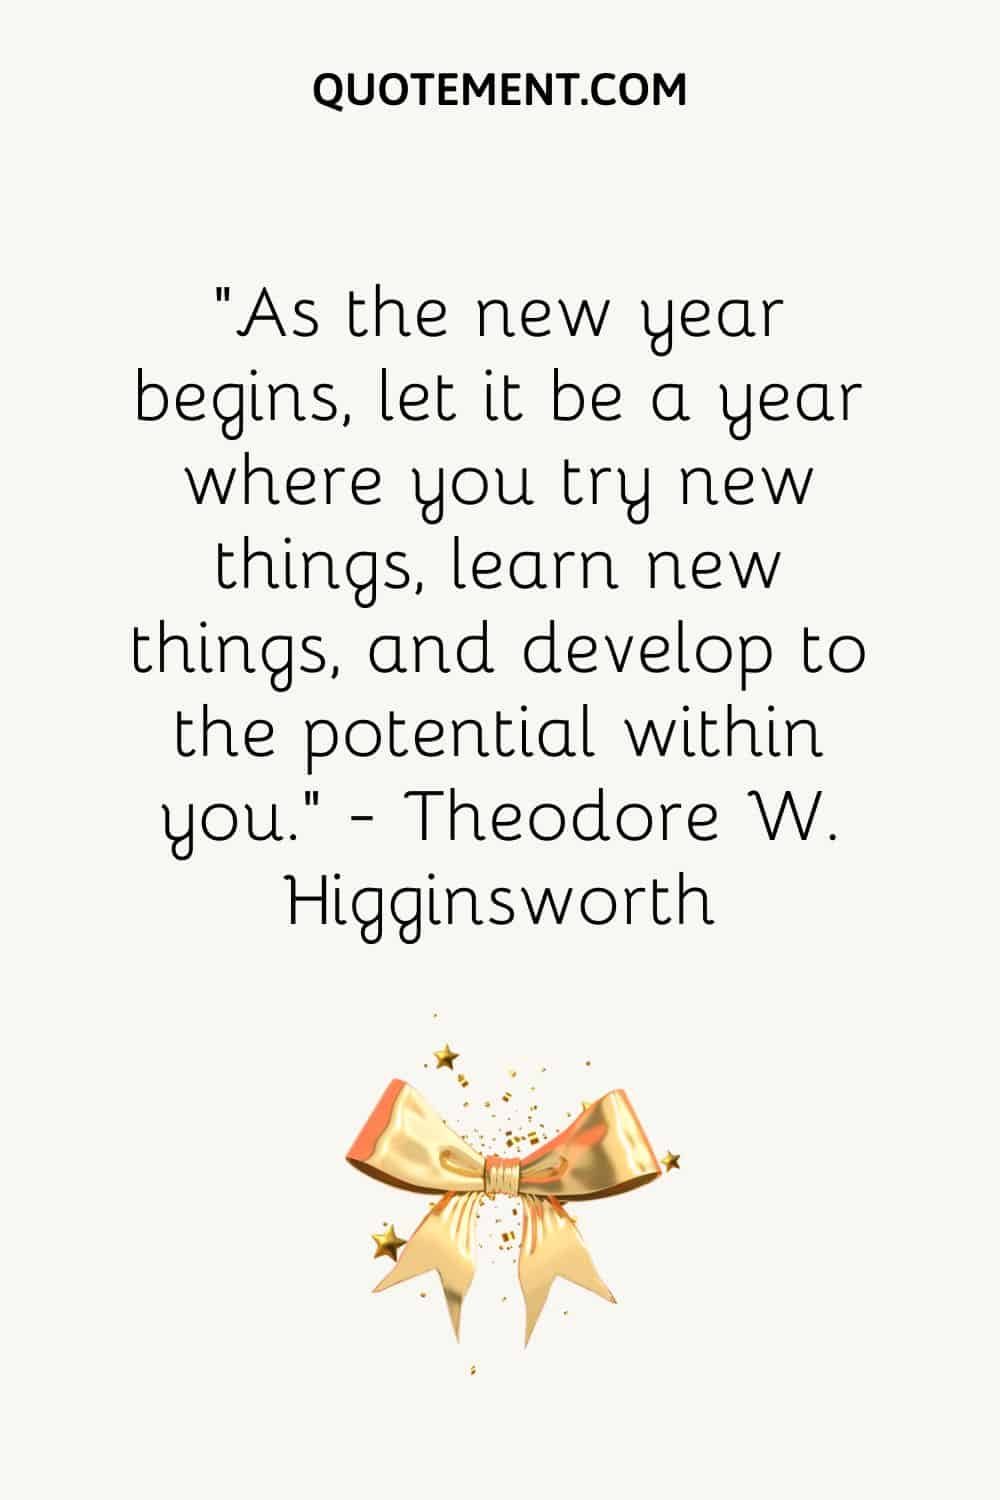 “As the new year begins, let it be a year where you try new things, learn new things, and develop to the potential within you.” ― Theodore W. Higginsworth